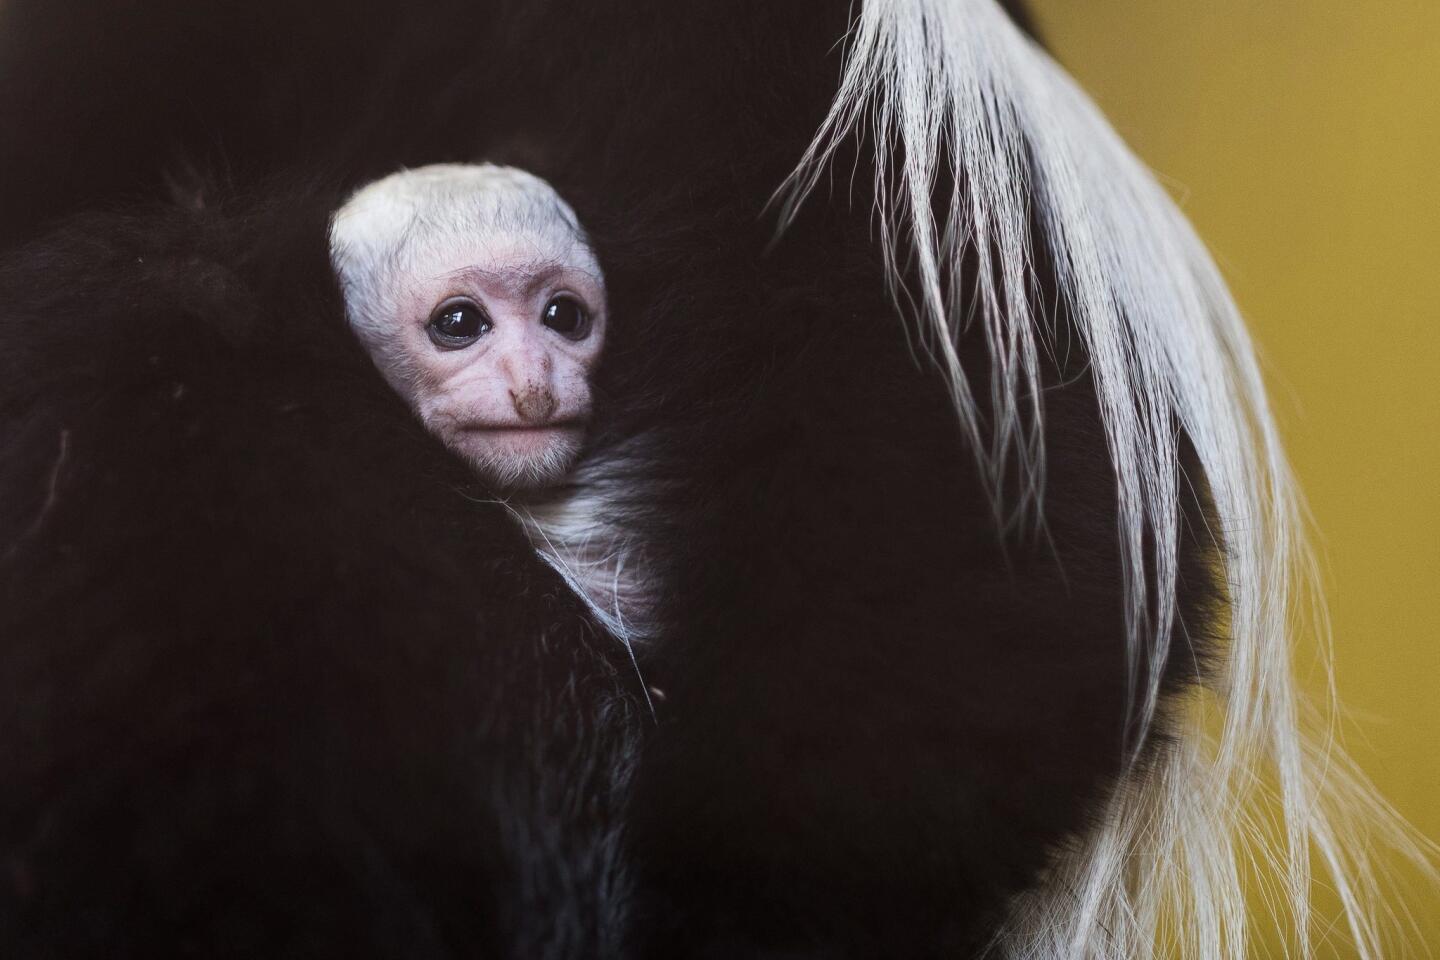 A female mantled guereza holds its 4-day-old baby in the Nyiregyhaza Animal Park in Nyiregyhaza, Hungary, on Dec. 28, 2016.